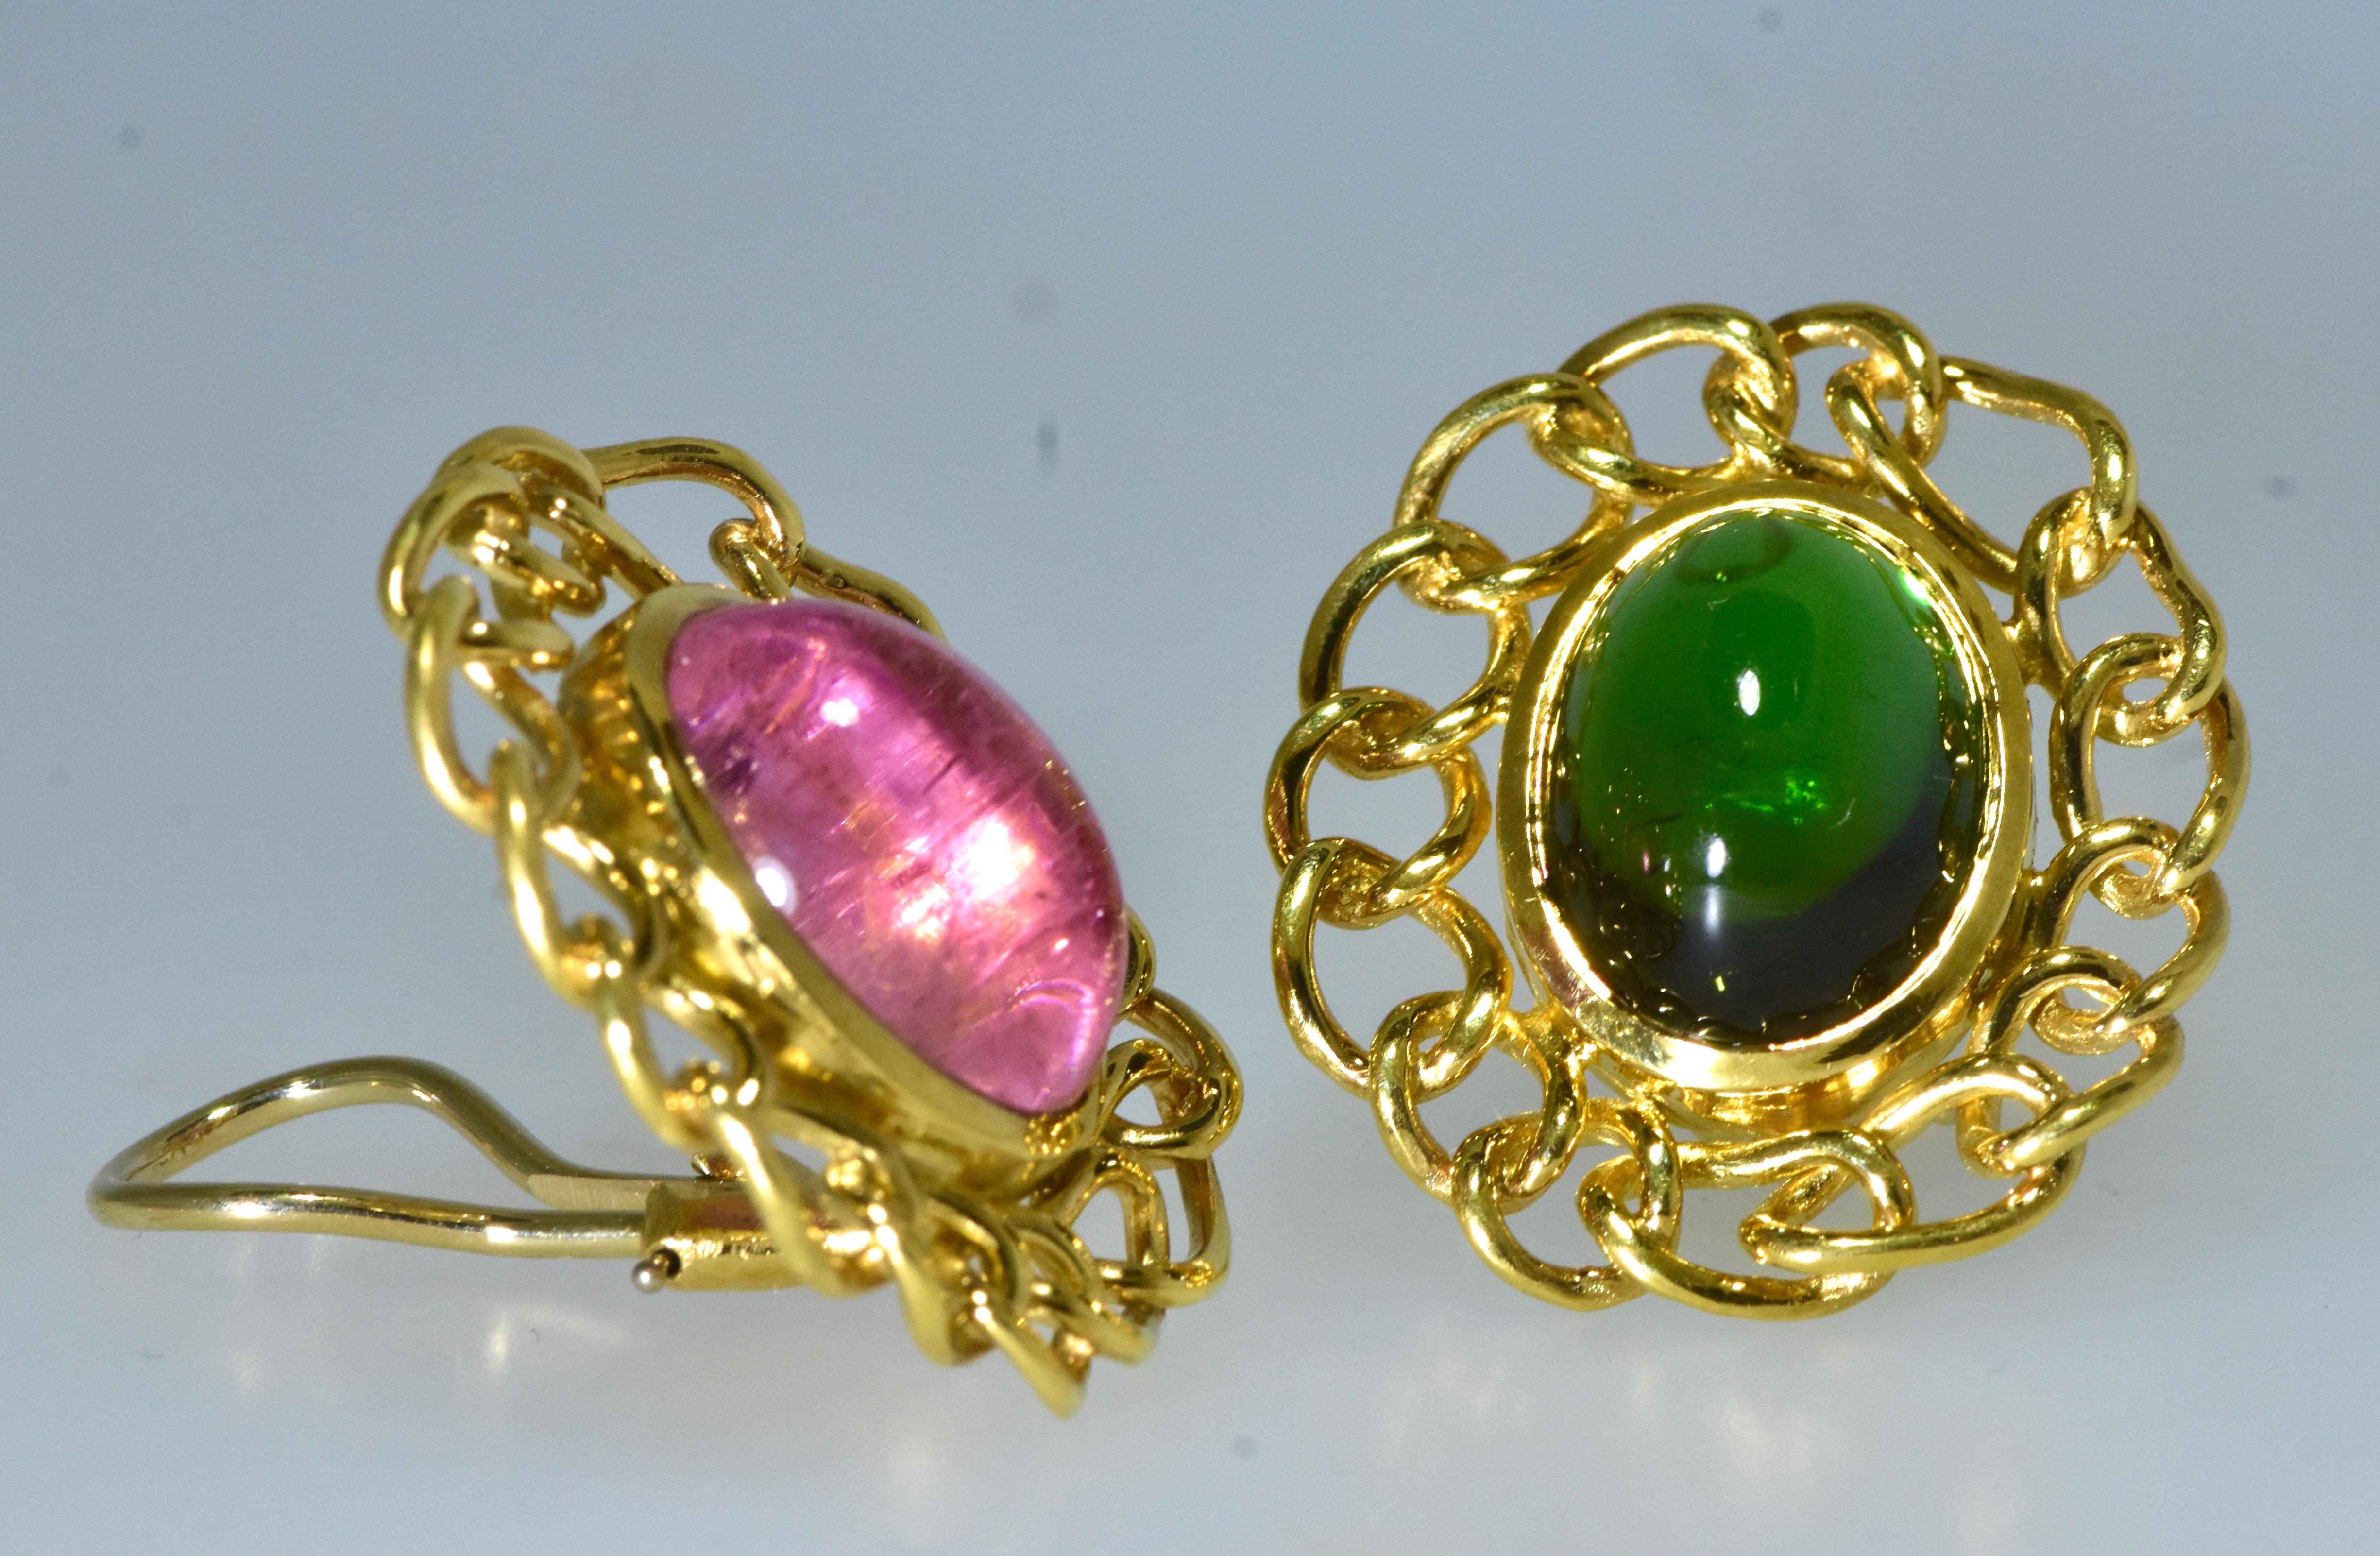 Angela Cummings 18K earrings with green and pink tourmalines.  The bright green and bright pink cabochon oval stones are estimated to each weigh 7.0 cts.  These 14 cts. of tourmaline are surrounded by a frame of 18K gold links.  The earrings are now